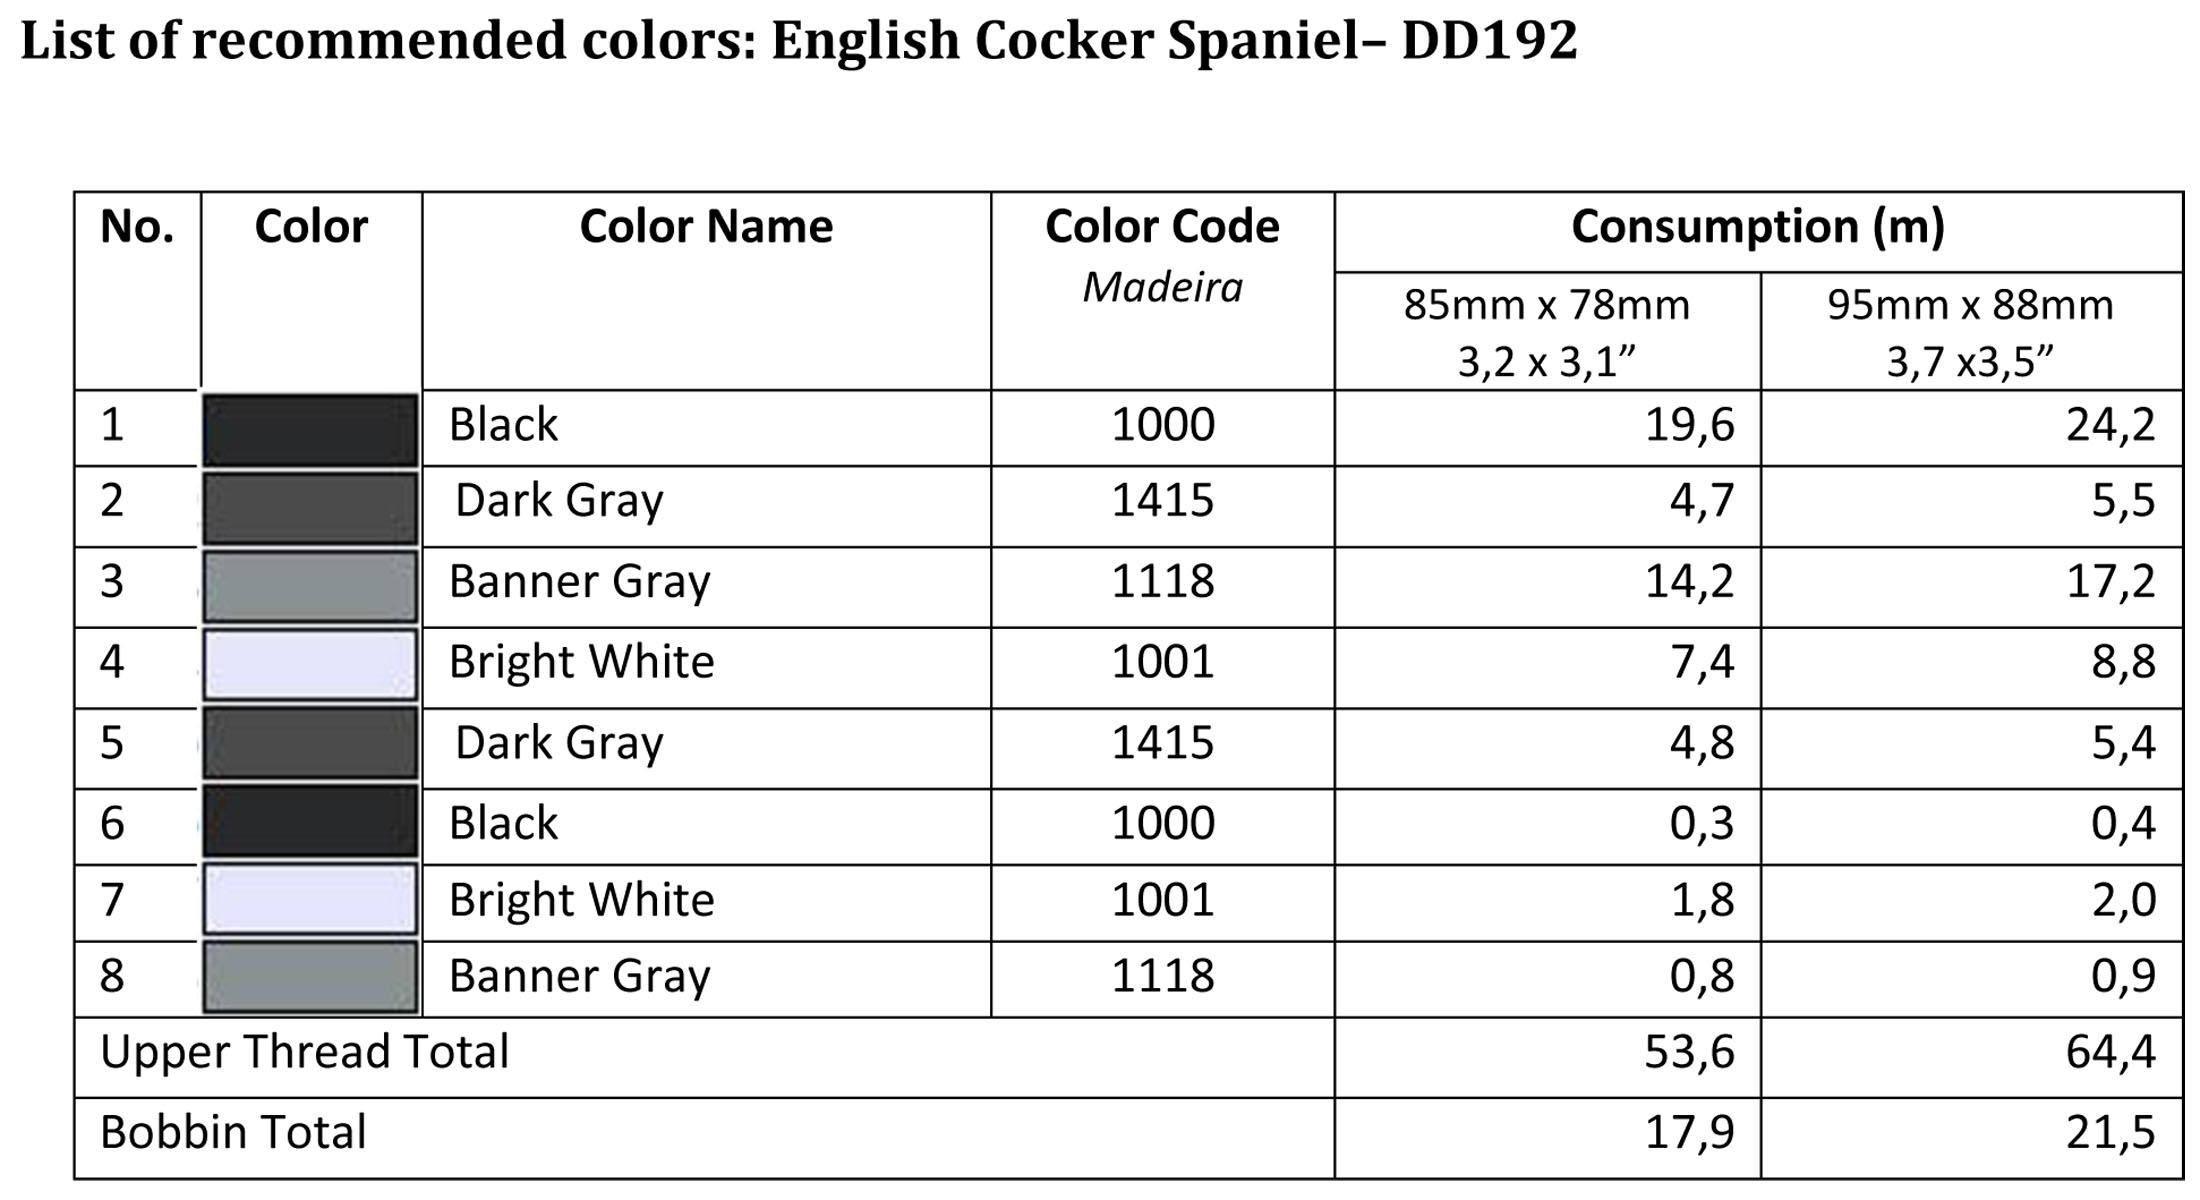 List of recommended colors - DD192